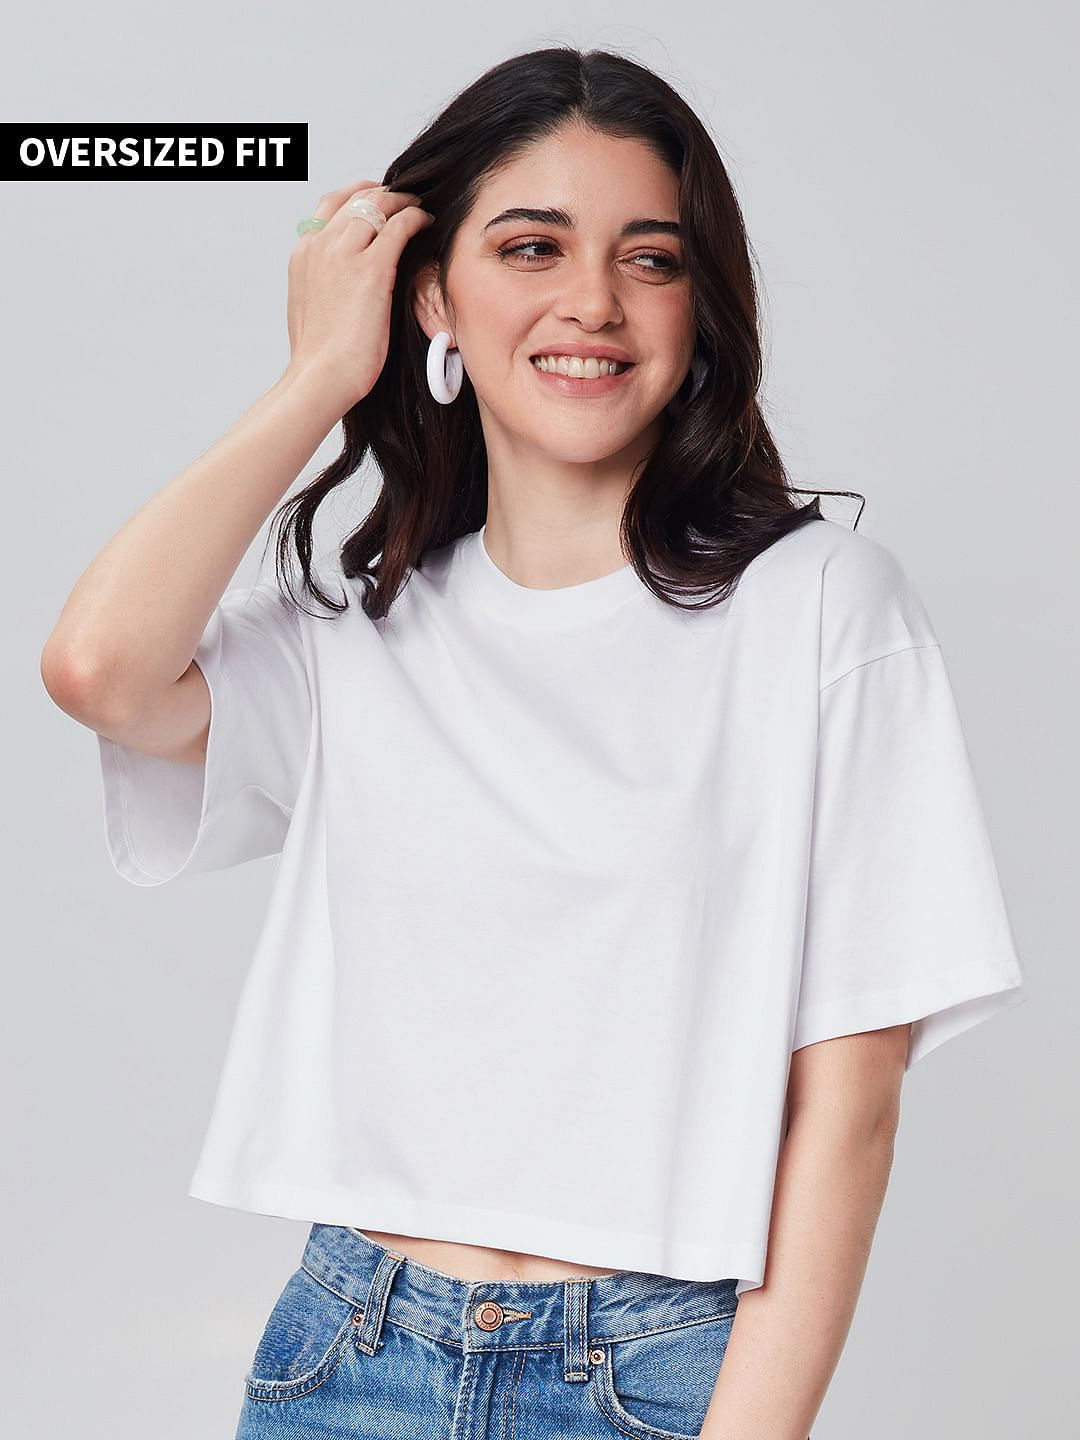 Buy Official Solids White Women Oversized Cropped T Shirt Online At The Souled Store 8613